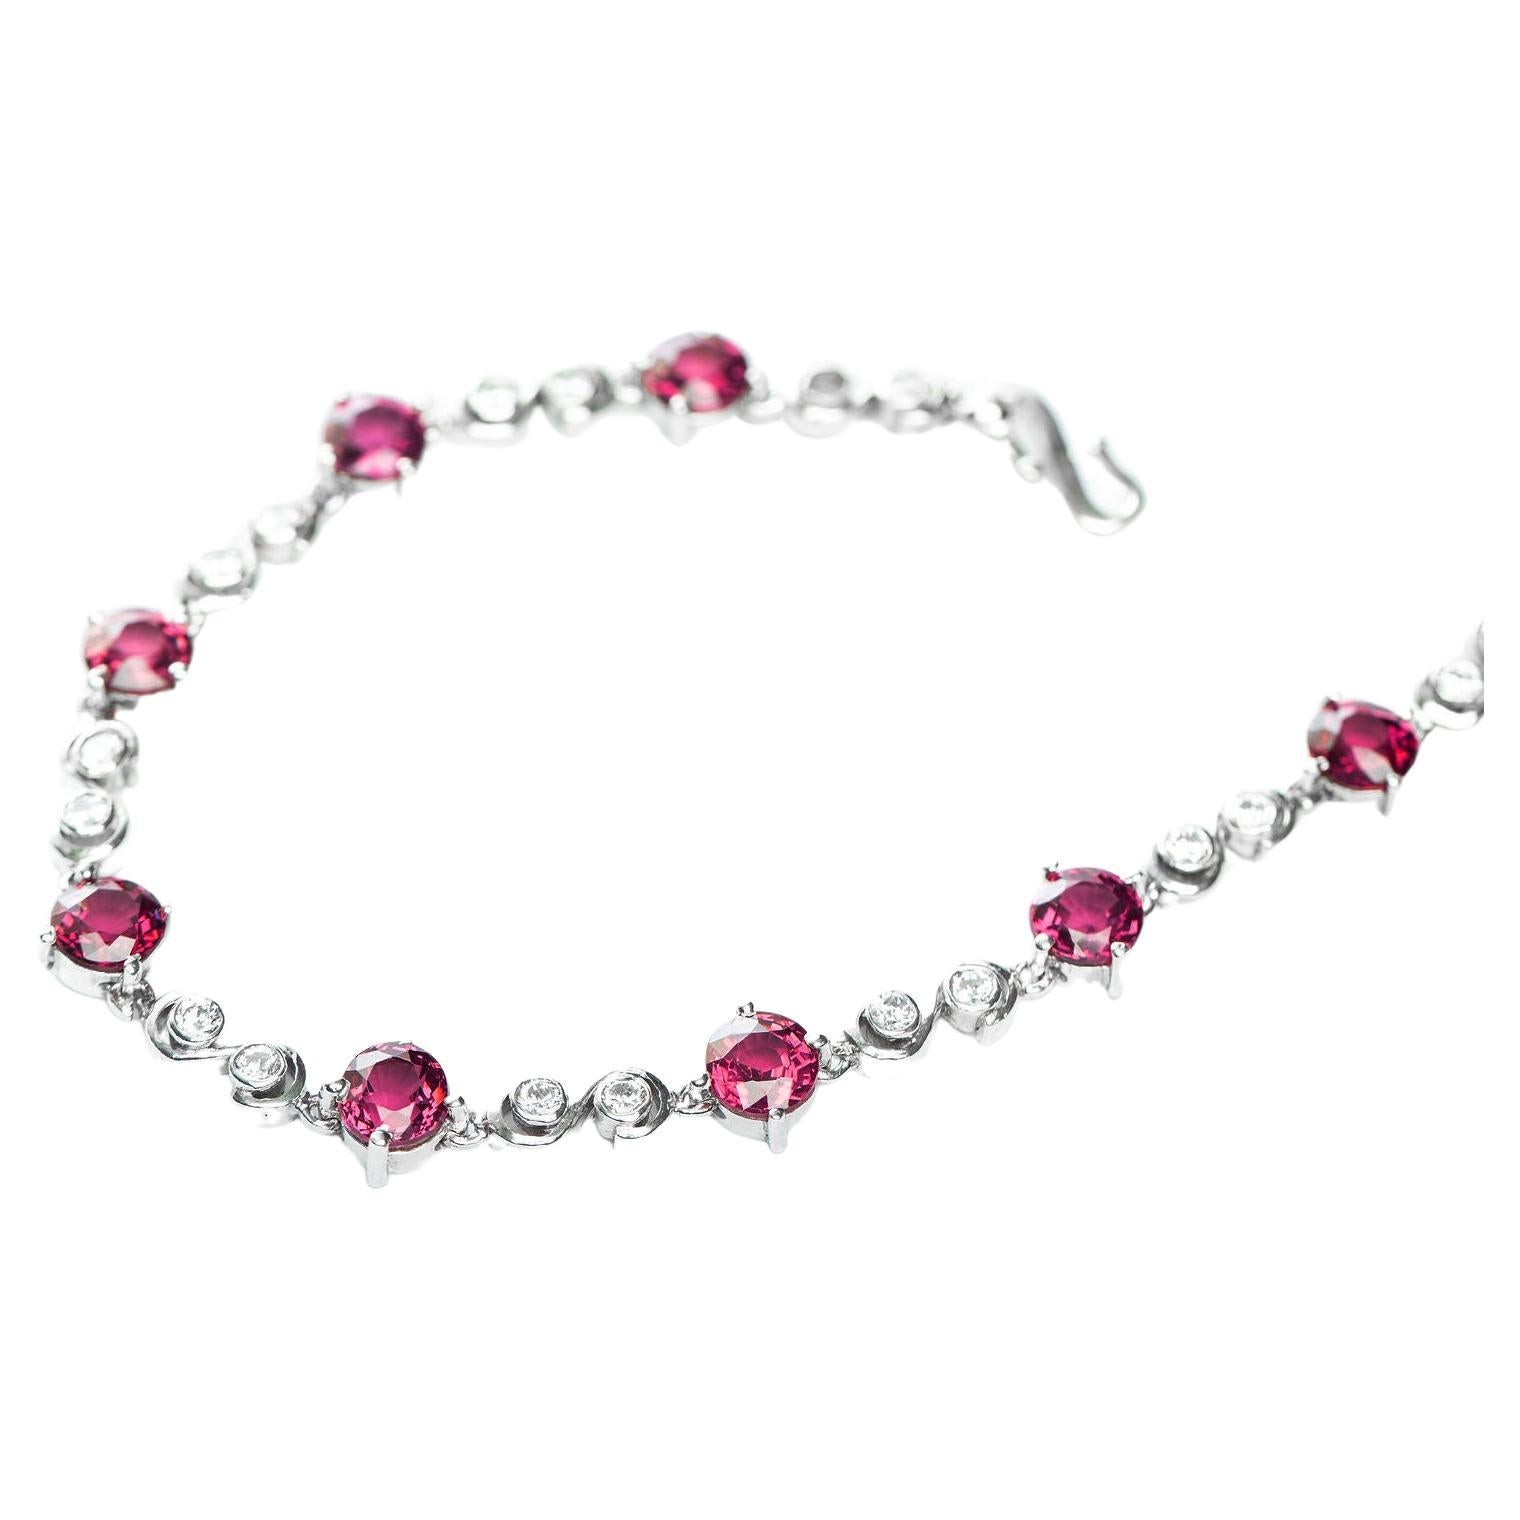 8.25ctw Round Cut Pink Tourmaline Tennis Bracelet  In New Condition For Sale In Sheridan, WY